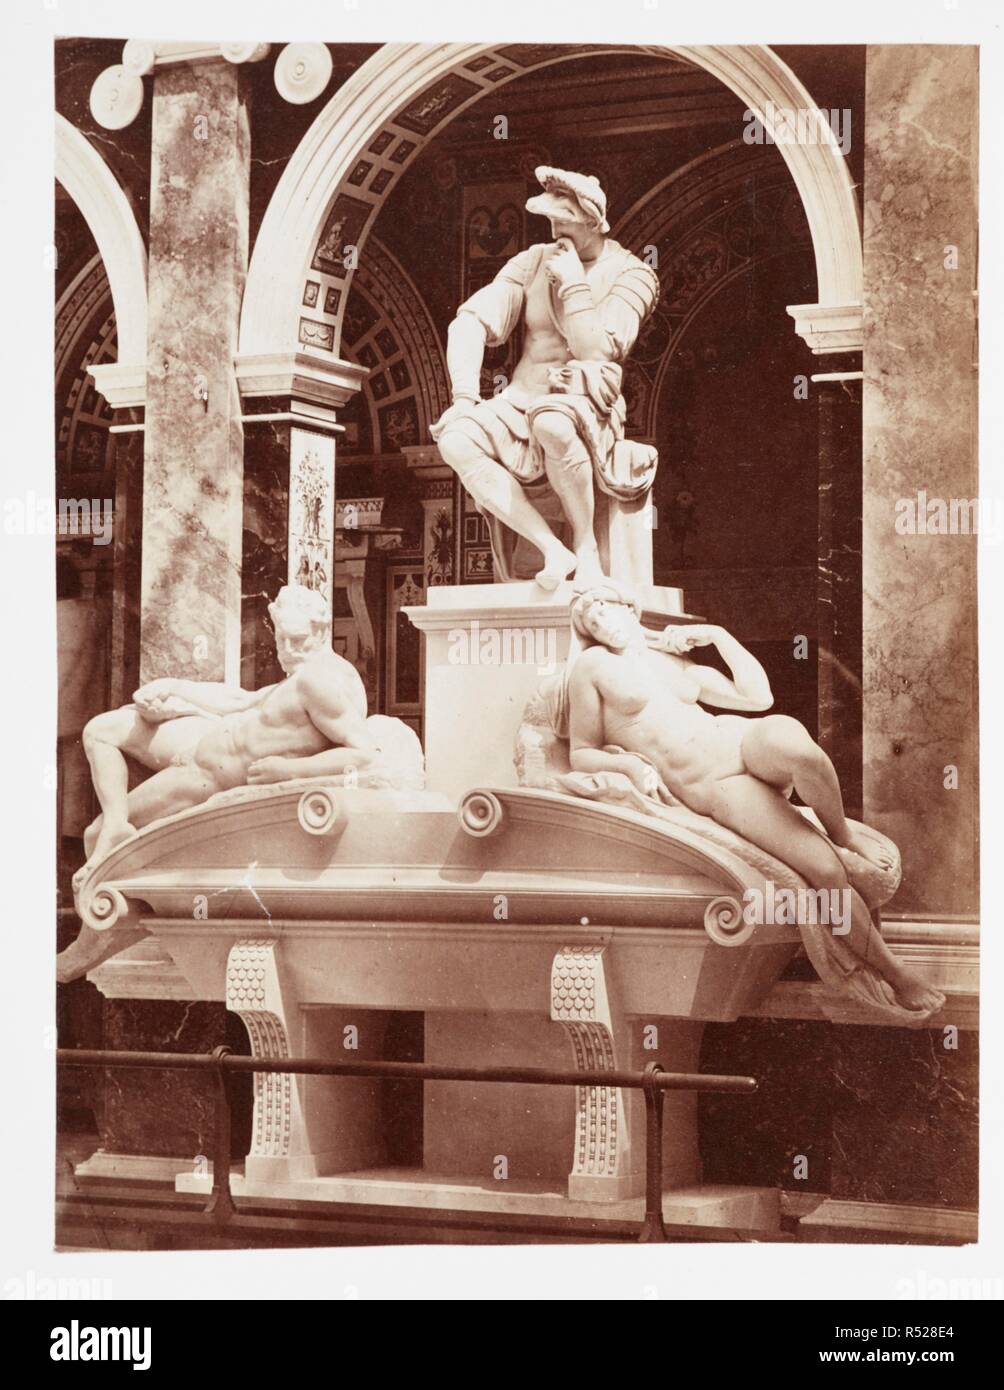 Monument to Lorenzo de' Medici, with figures of Night and Day, by Michel Angelo. Photographic Views of the Progress of the Crystal Palace, Sydenham. Taken during the progress of the works, by desire of the directors, by Philip H. Delamotte. Together with a list of the directors and officers of the company, etc. London, 1855. Source: Tab.442.a.5, plate 87. Author: DELAMOTTE, PHILIP HENRY. Stock Photo